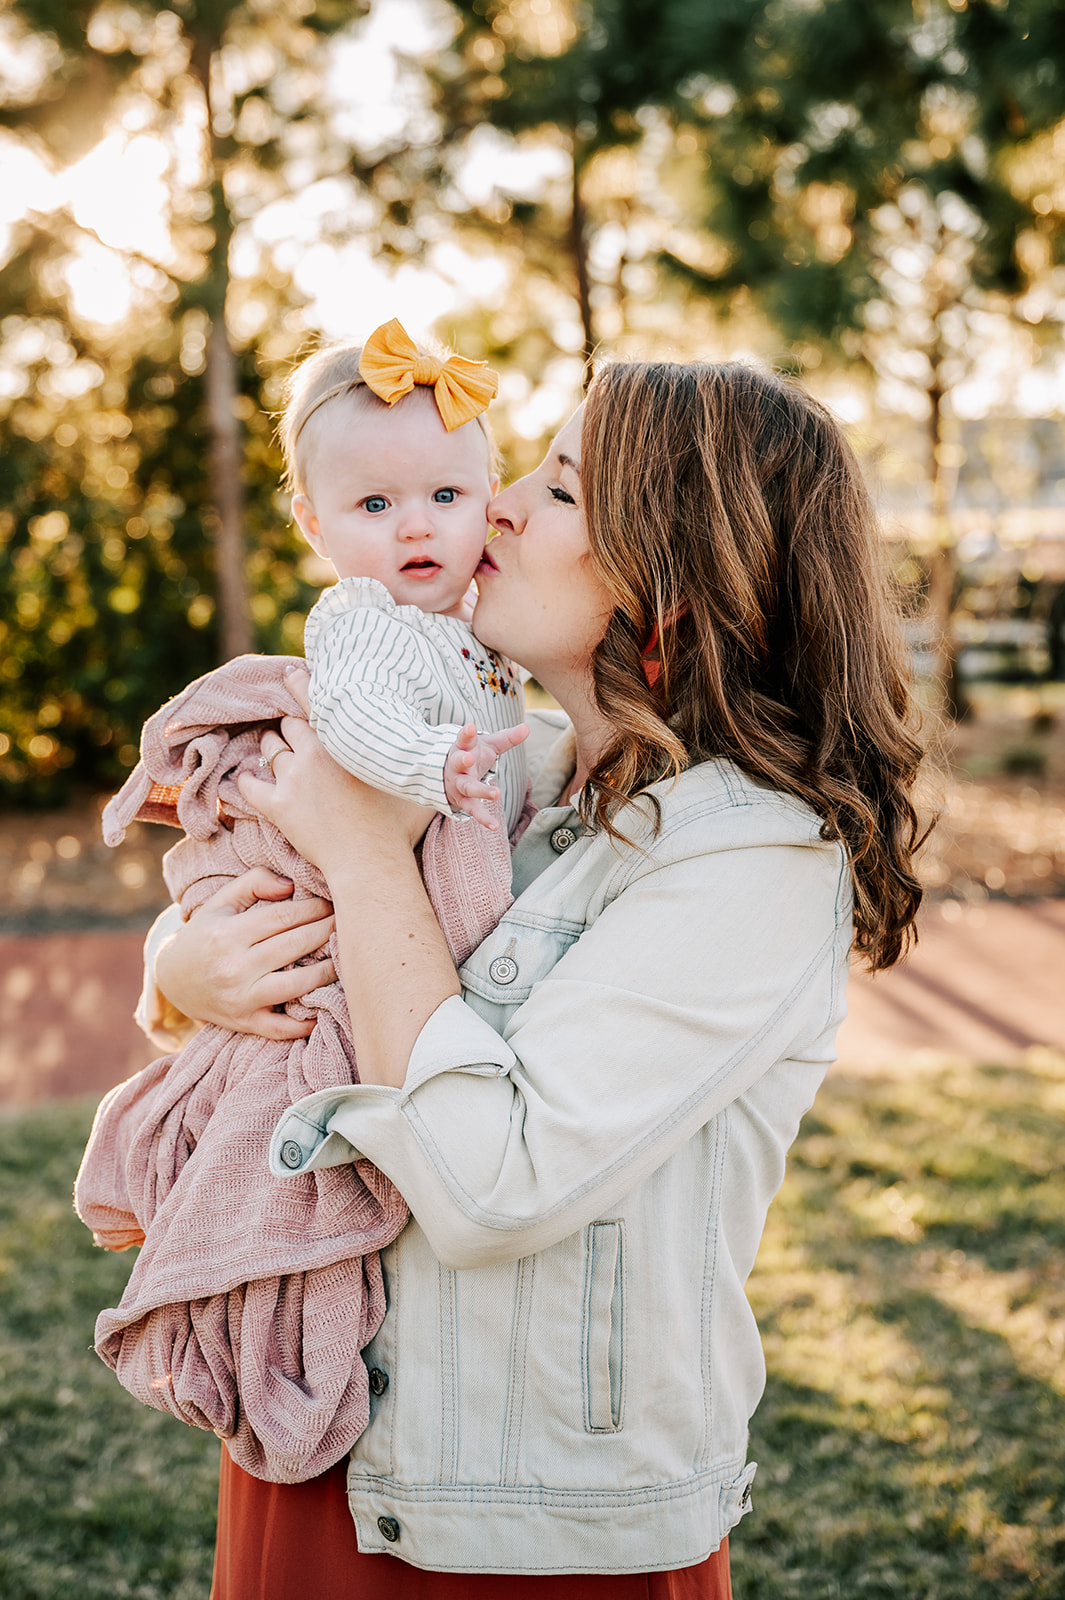 A new mom stands in a park at sunset kissing the cheek of her infant daughter with a yellow bow Charlotte Apple Picking